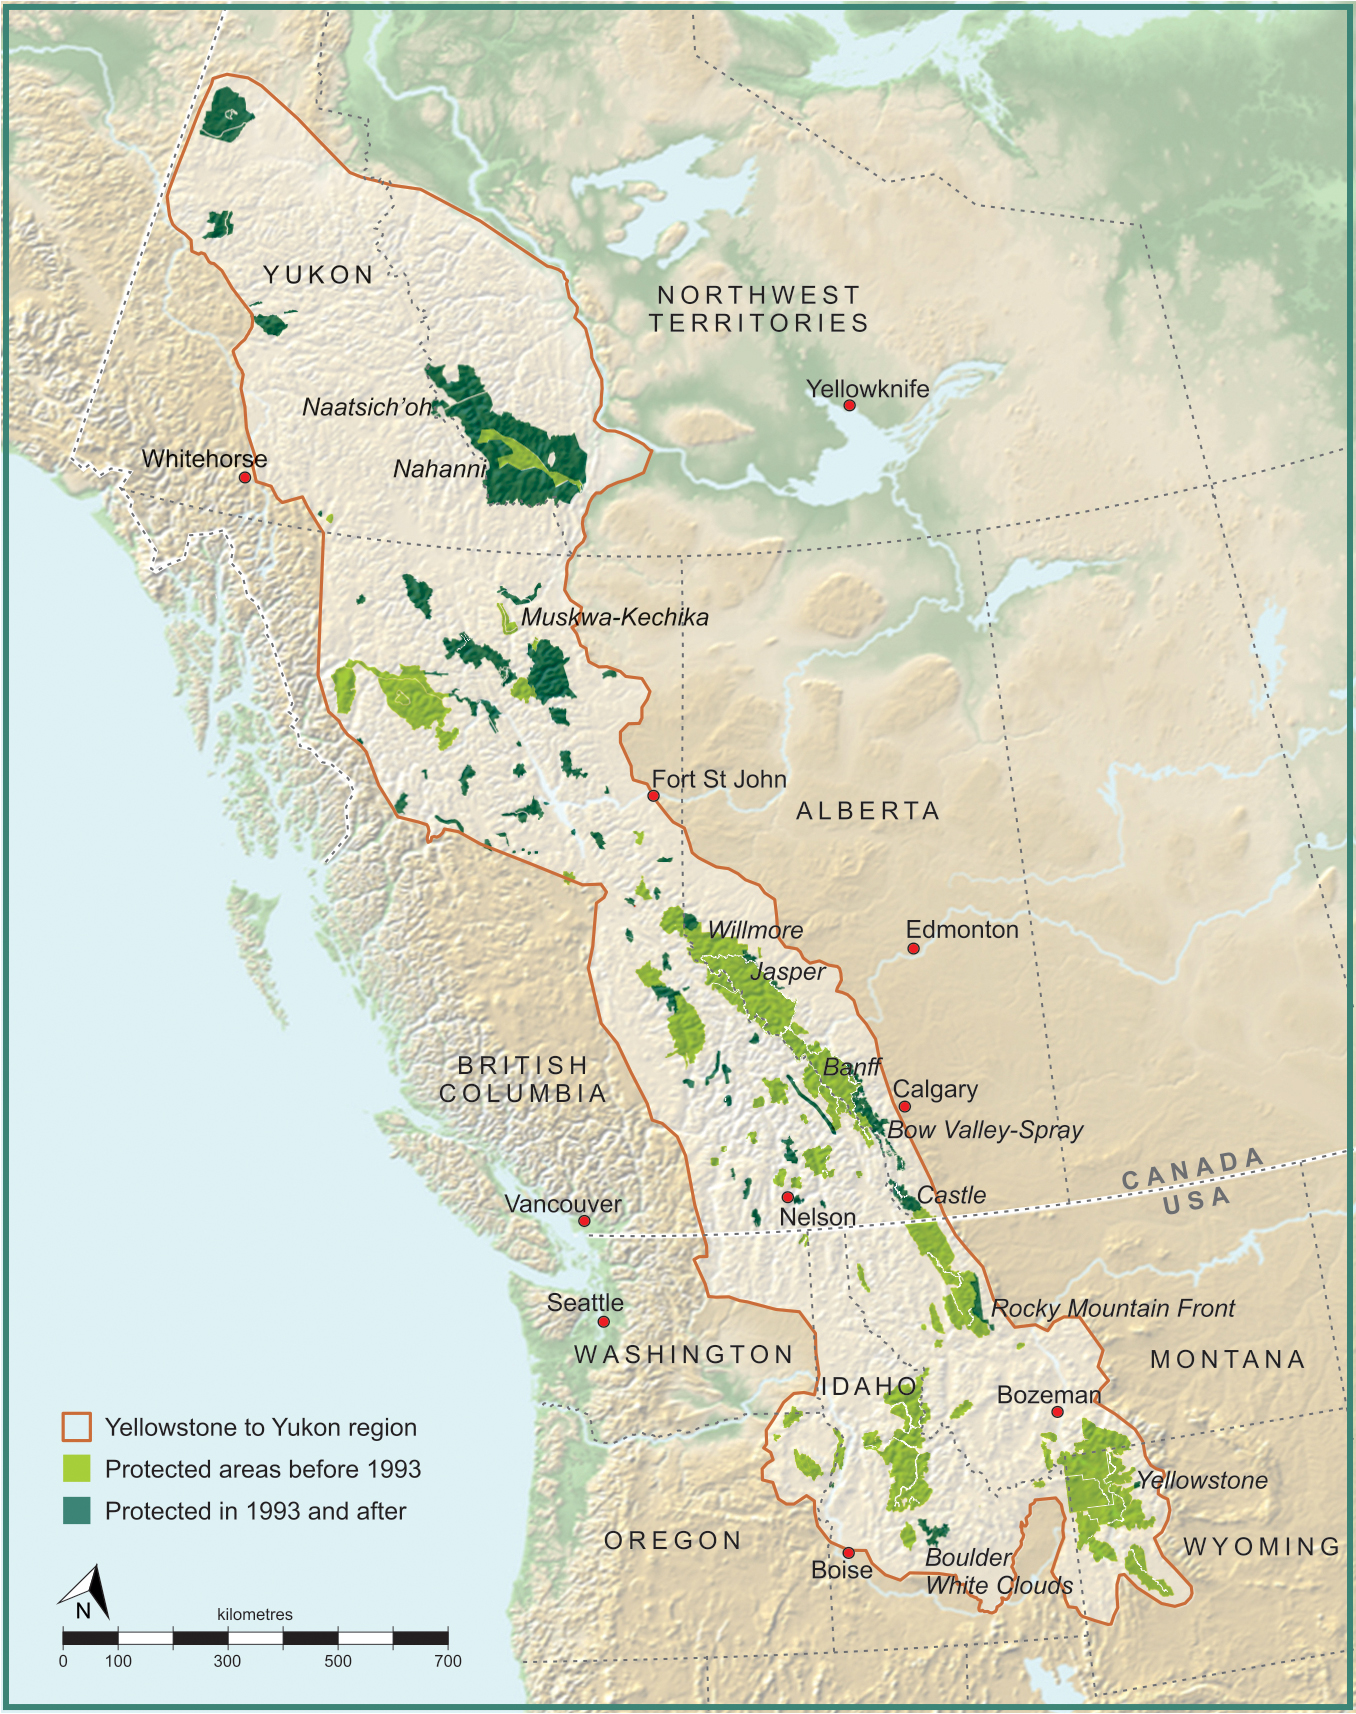 Map showing protected areas in the Y2Y region